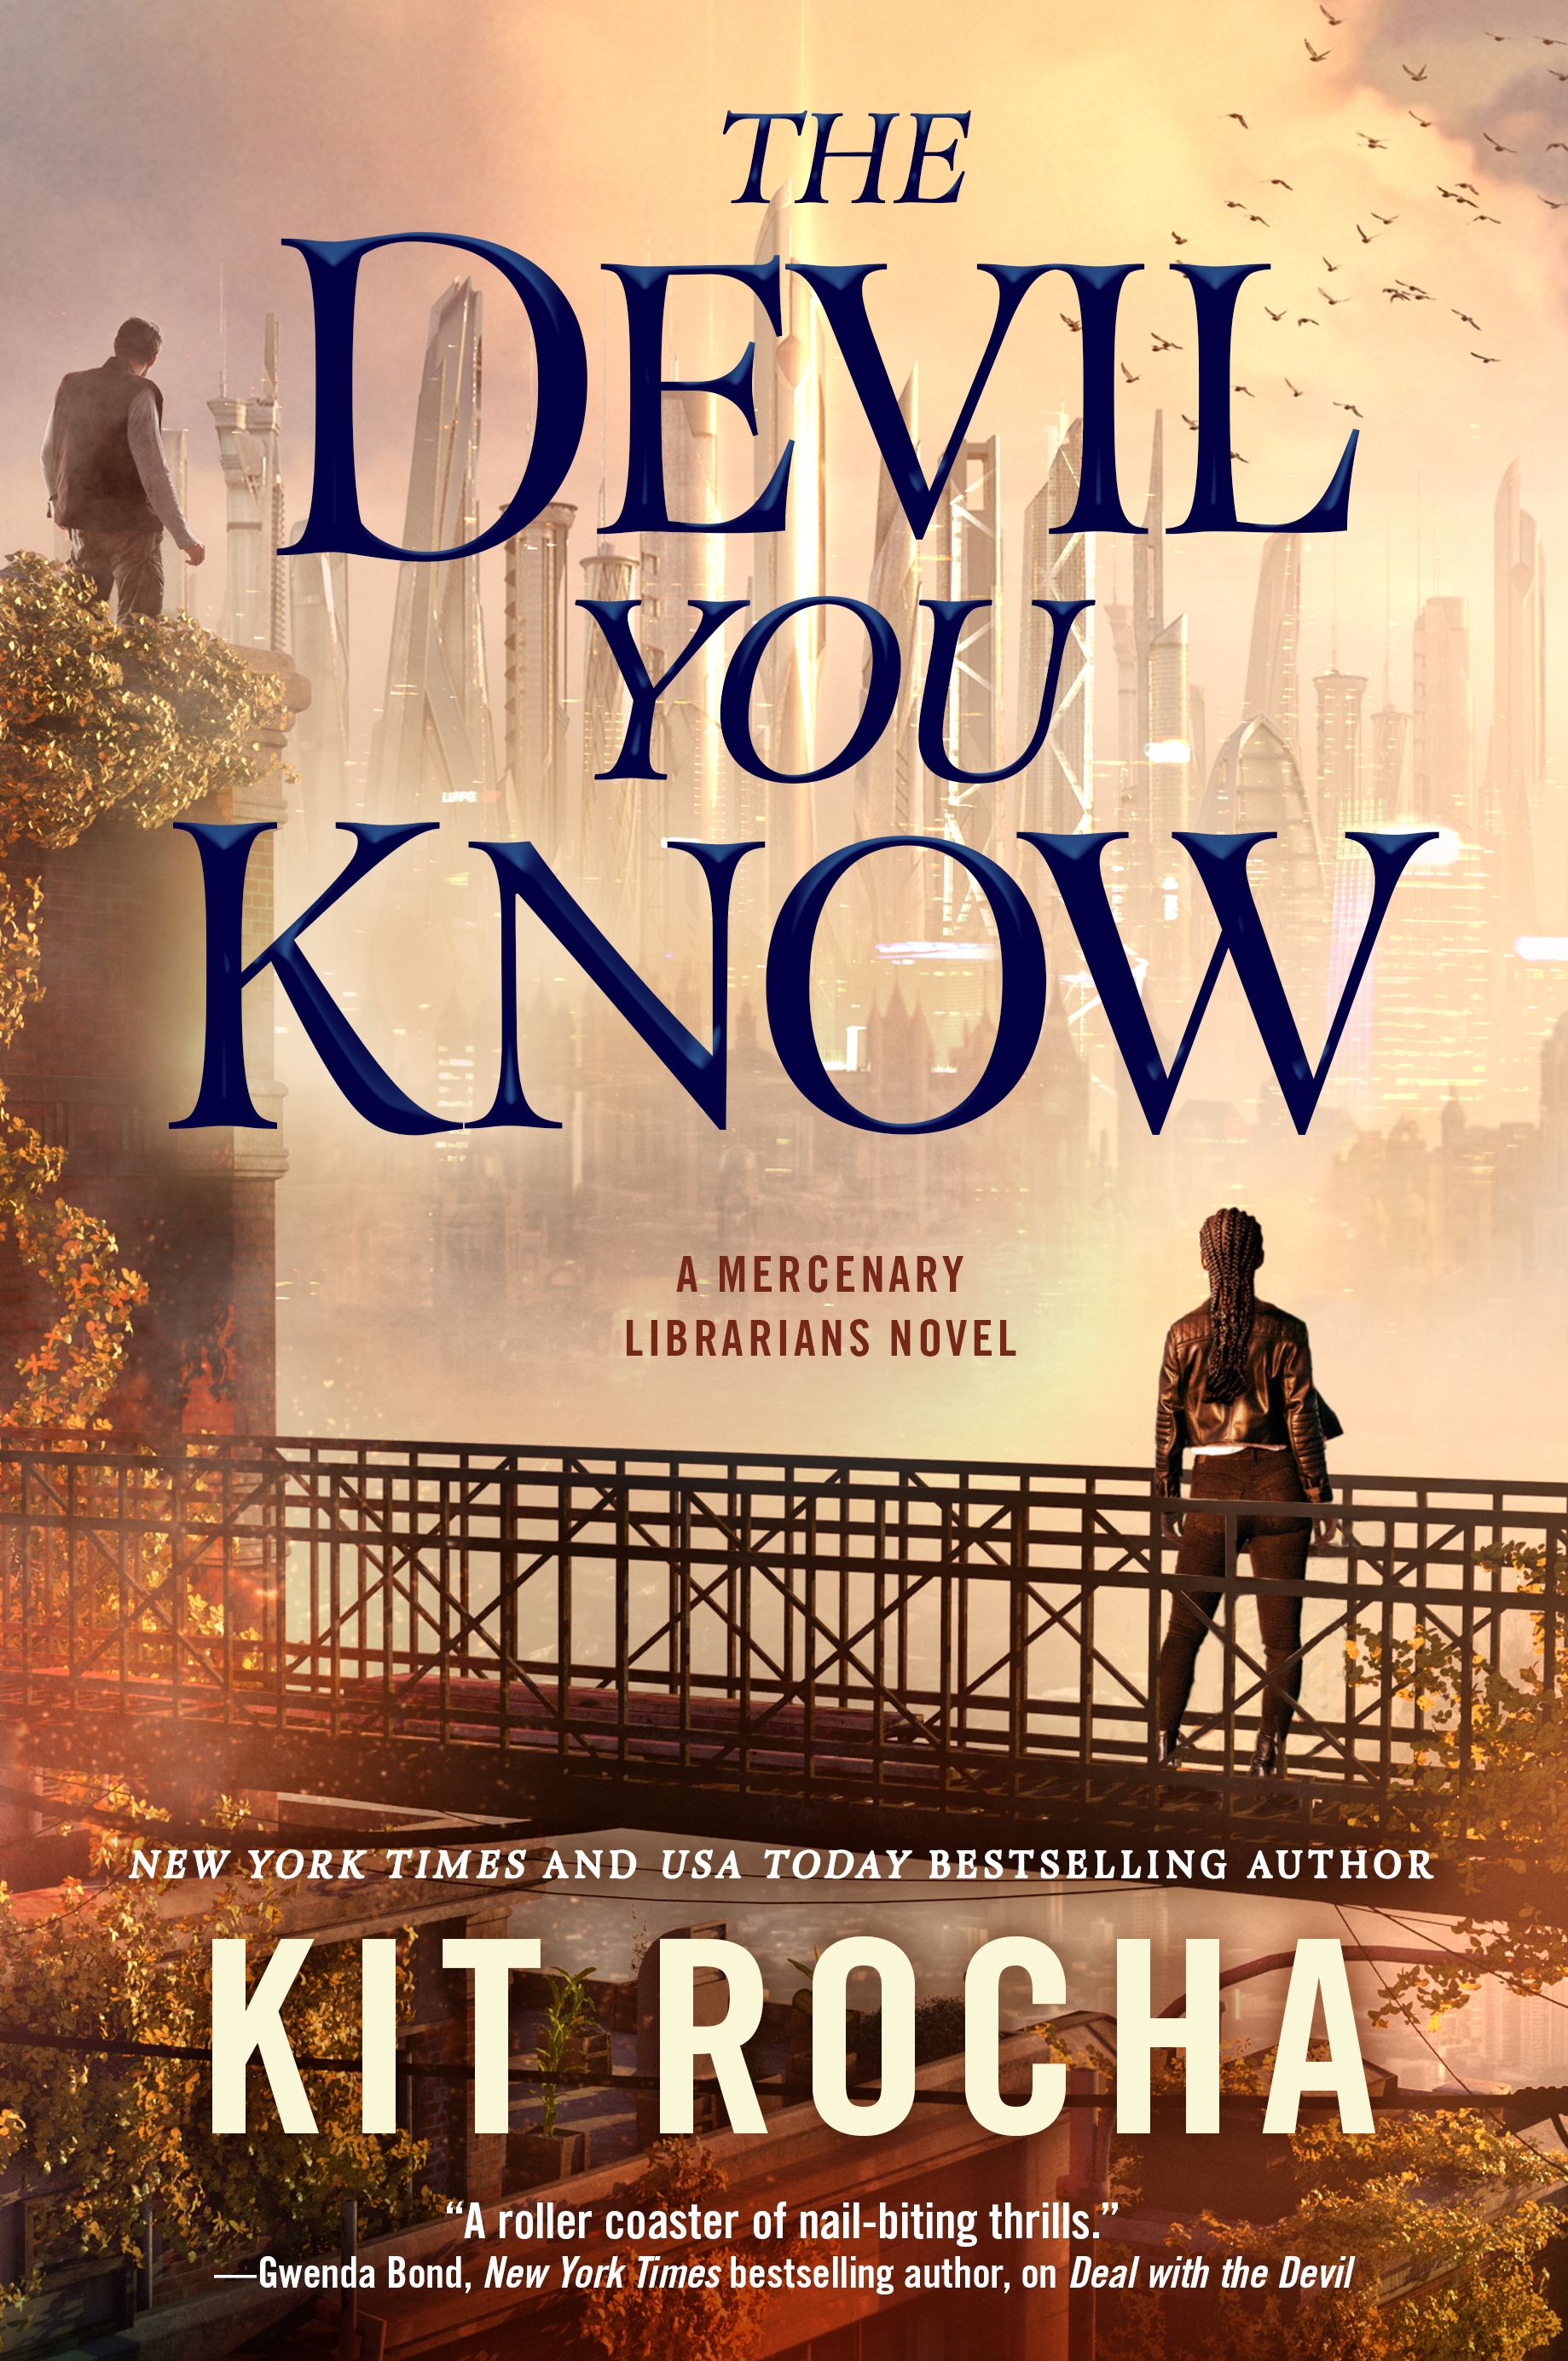 The Devil You Know : A Mercenary Librarians Novel by Kit Rocha